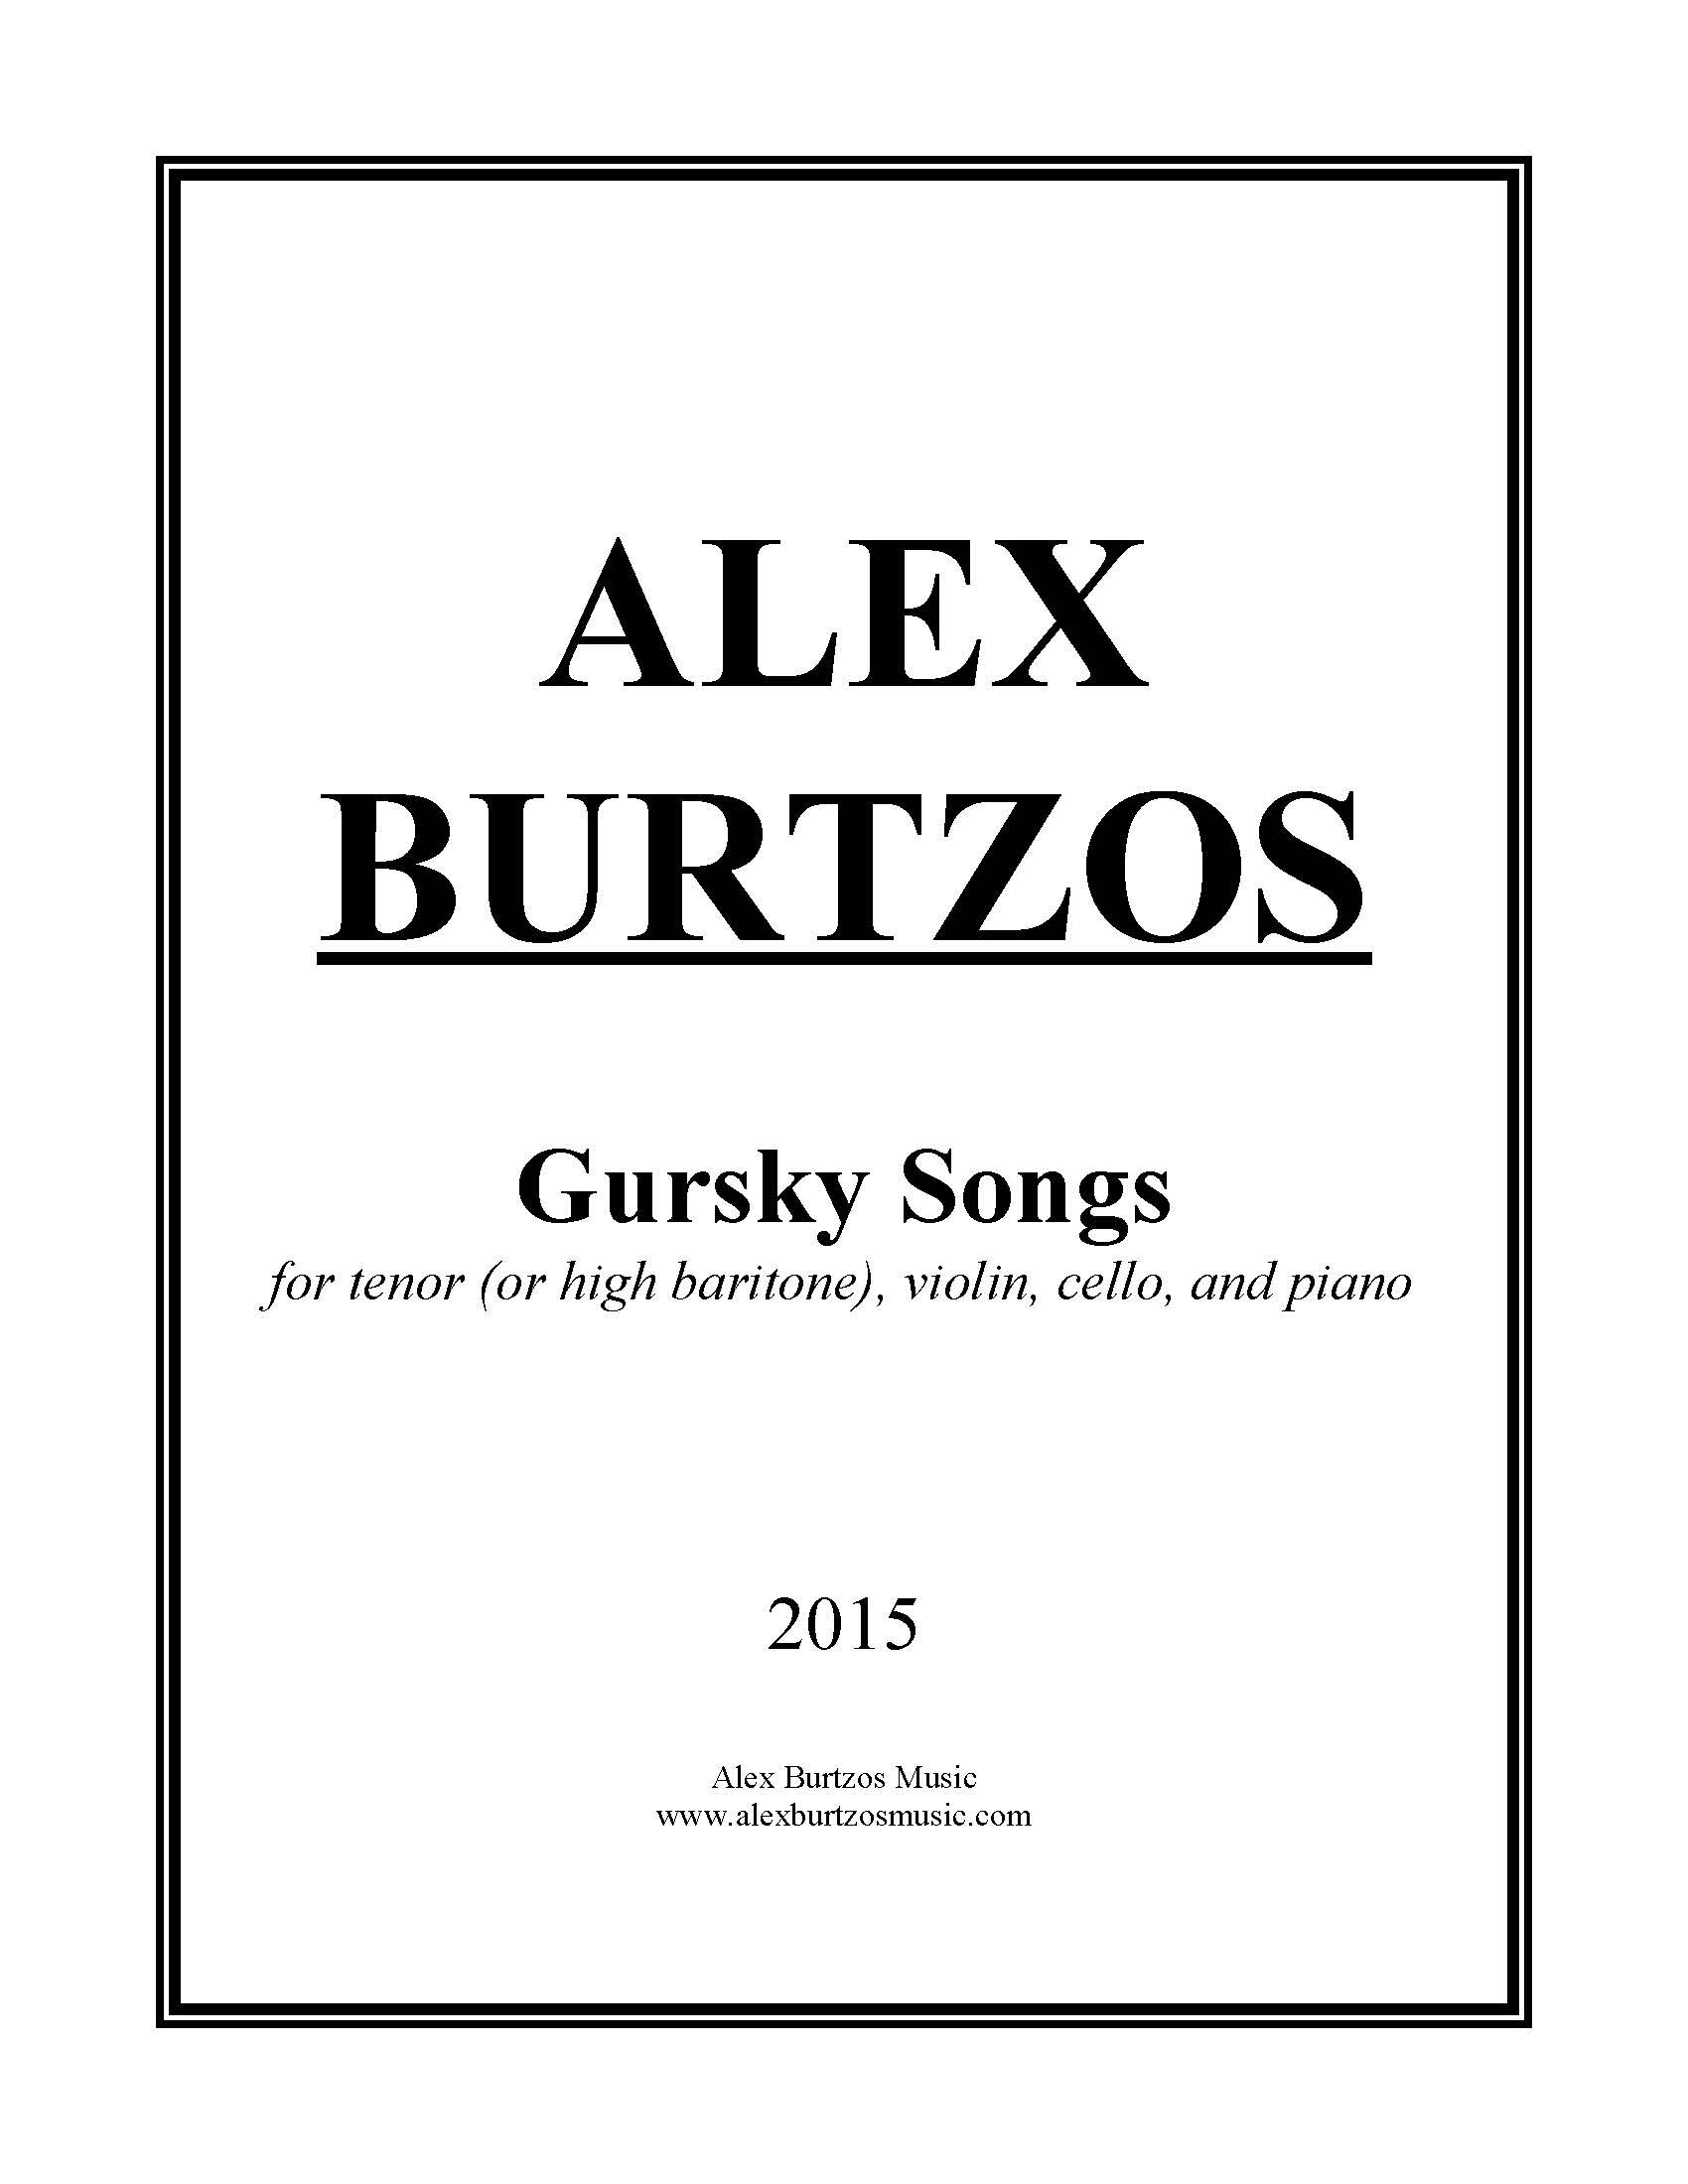 Gursky Songs - Complete Score_Page_01.jpg